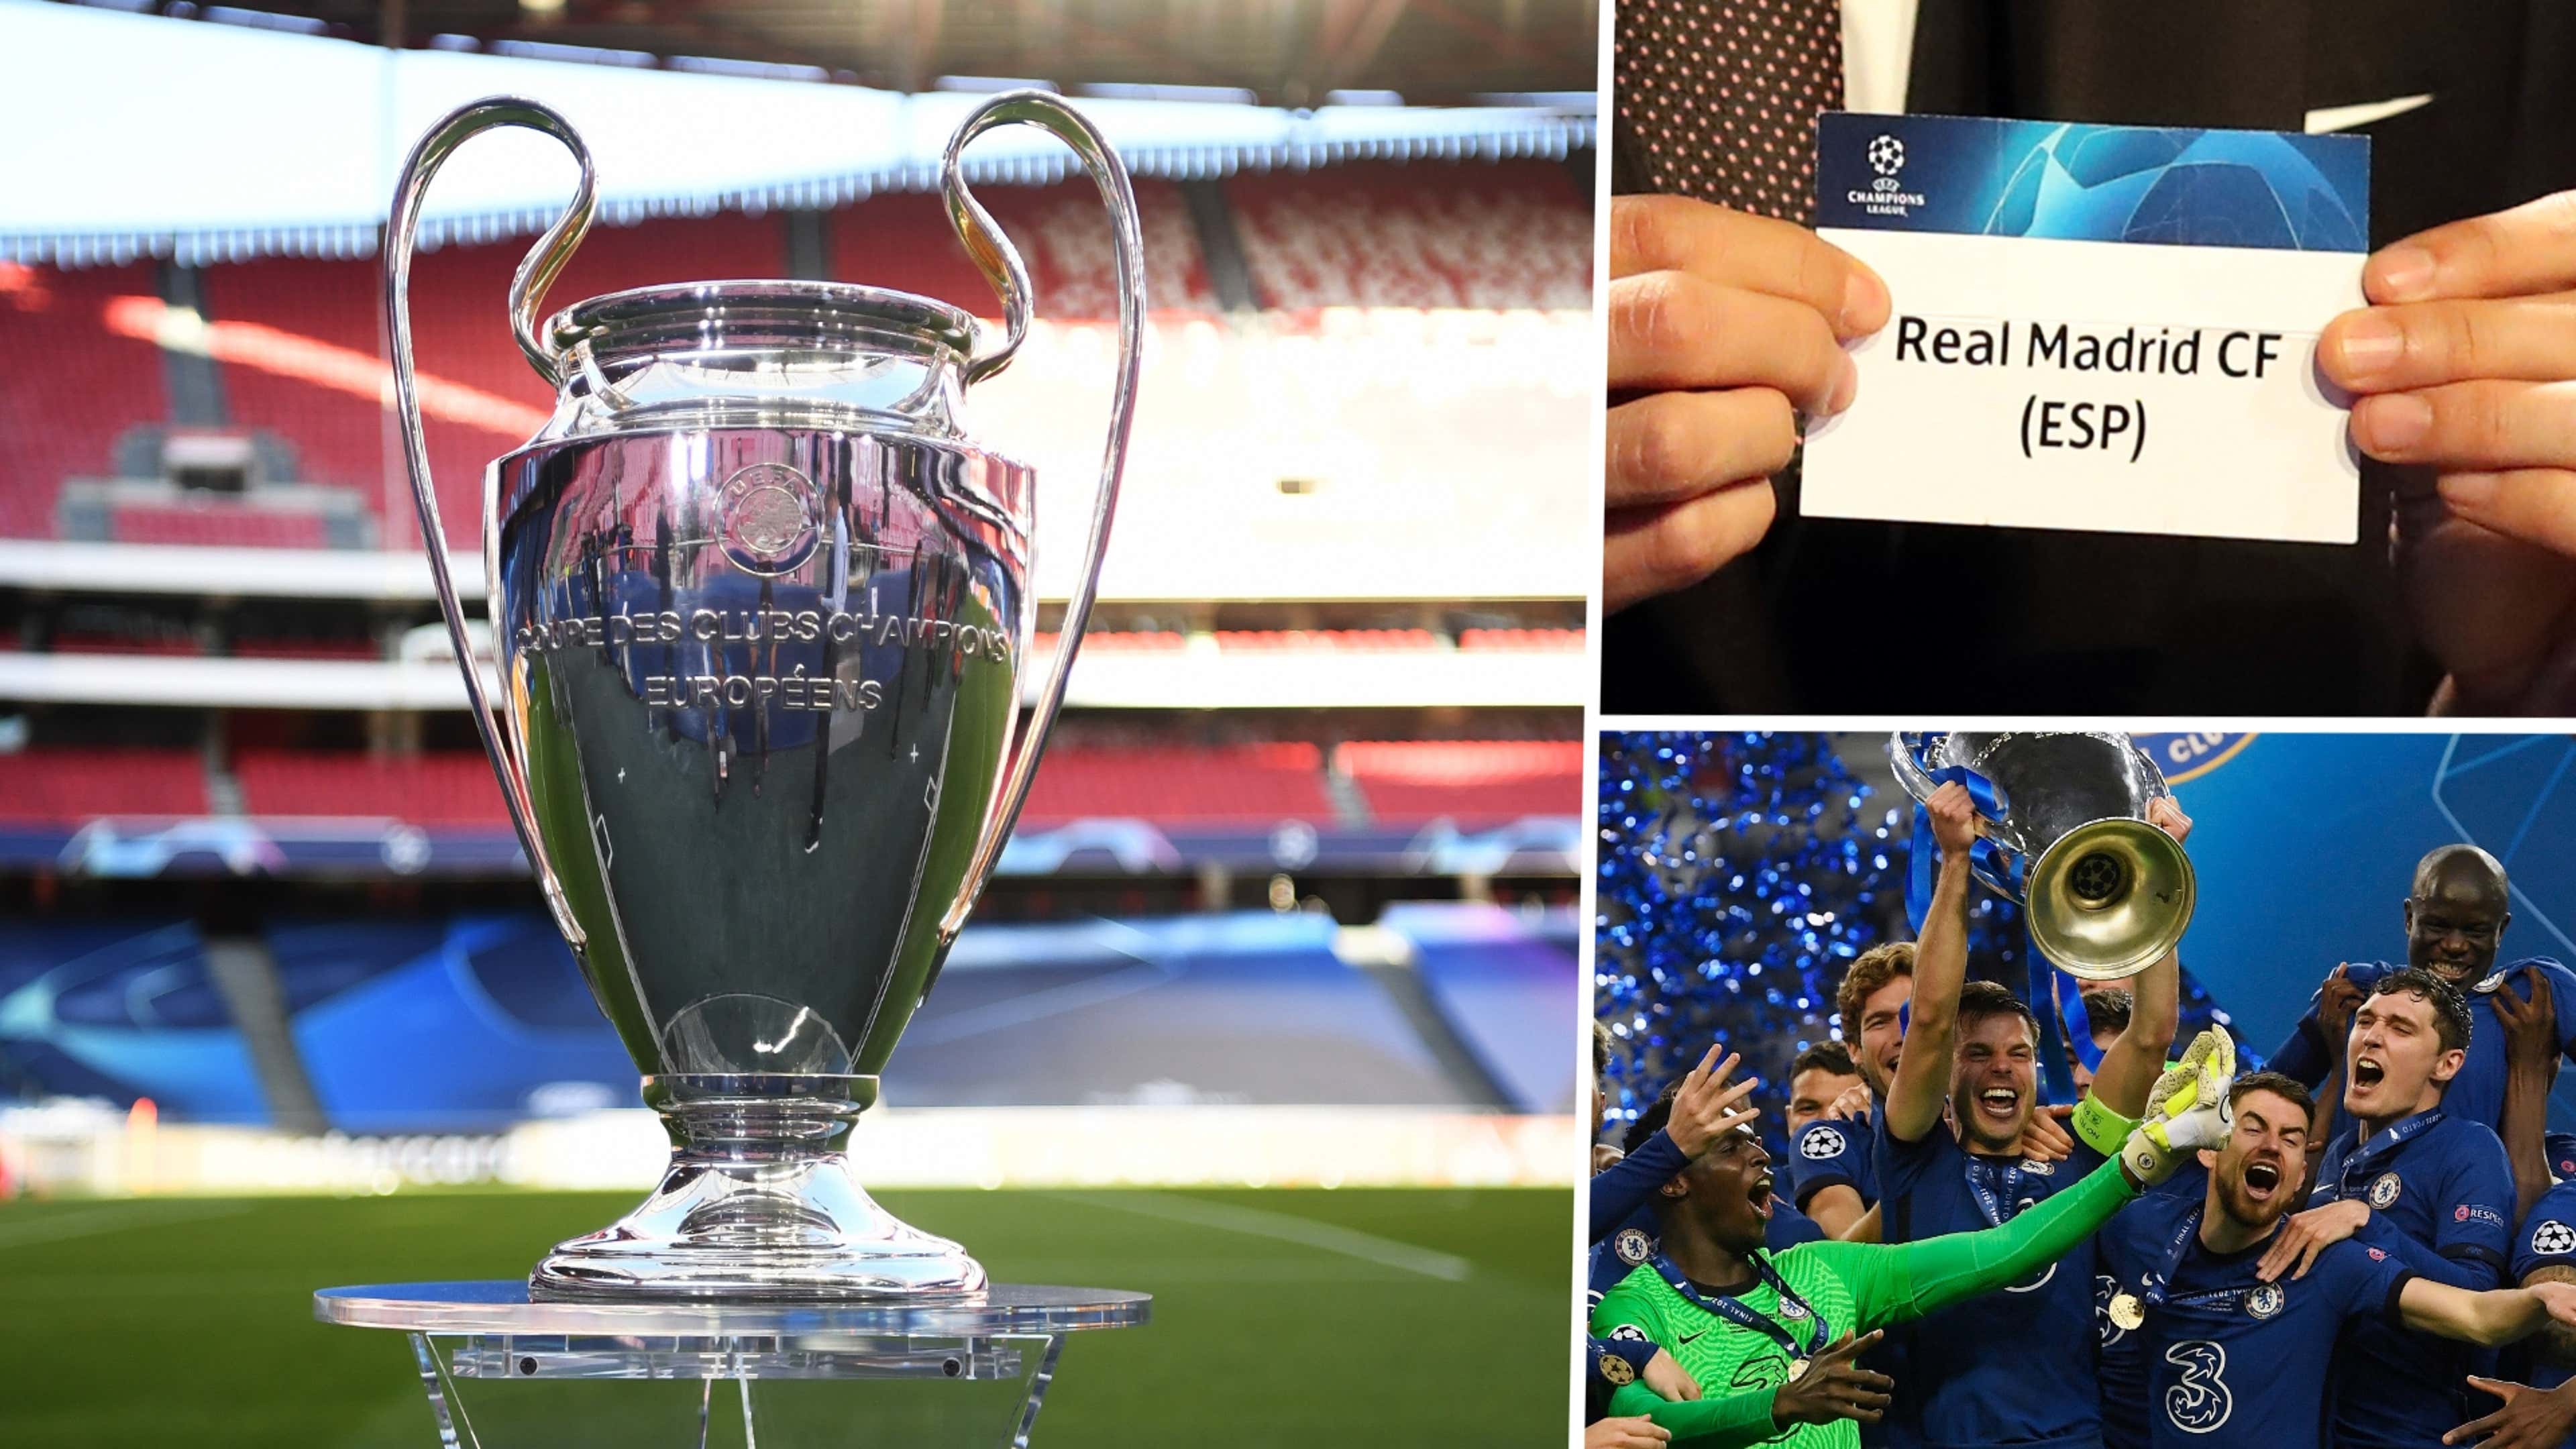 Champions League seeding pots: How 2023-24 group stage draw is shaping up